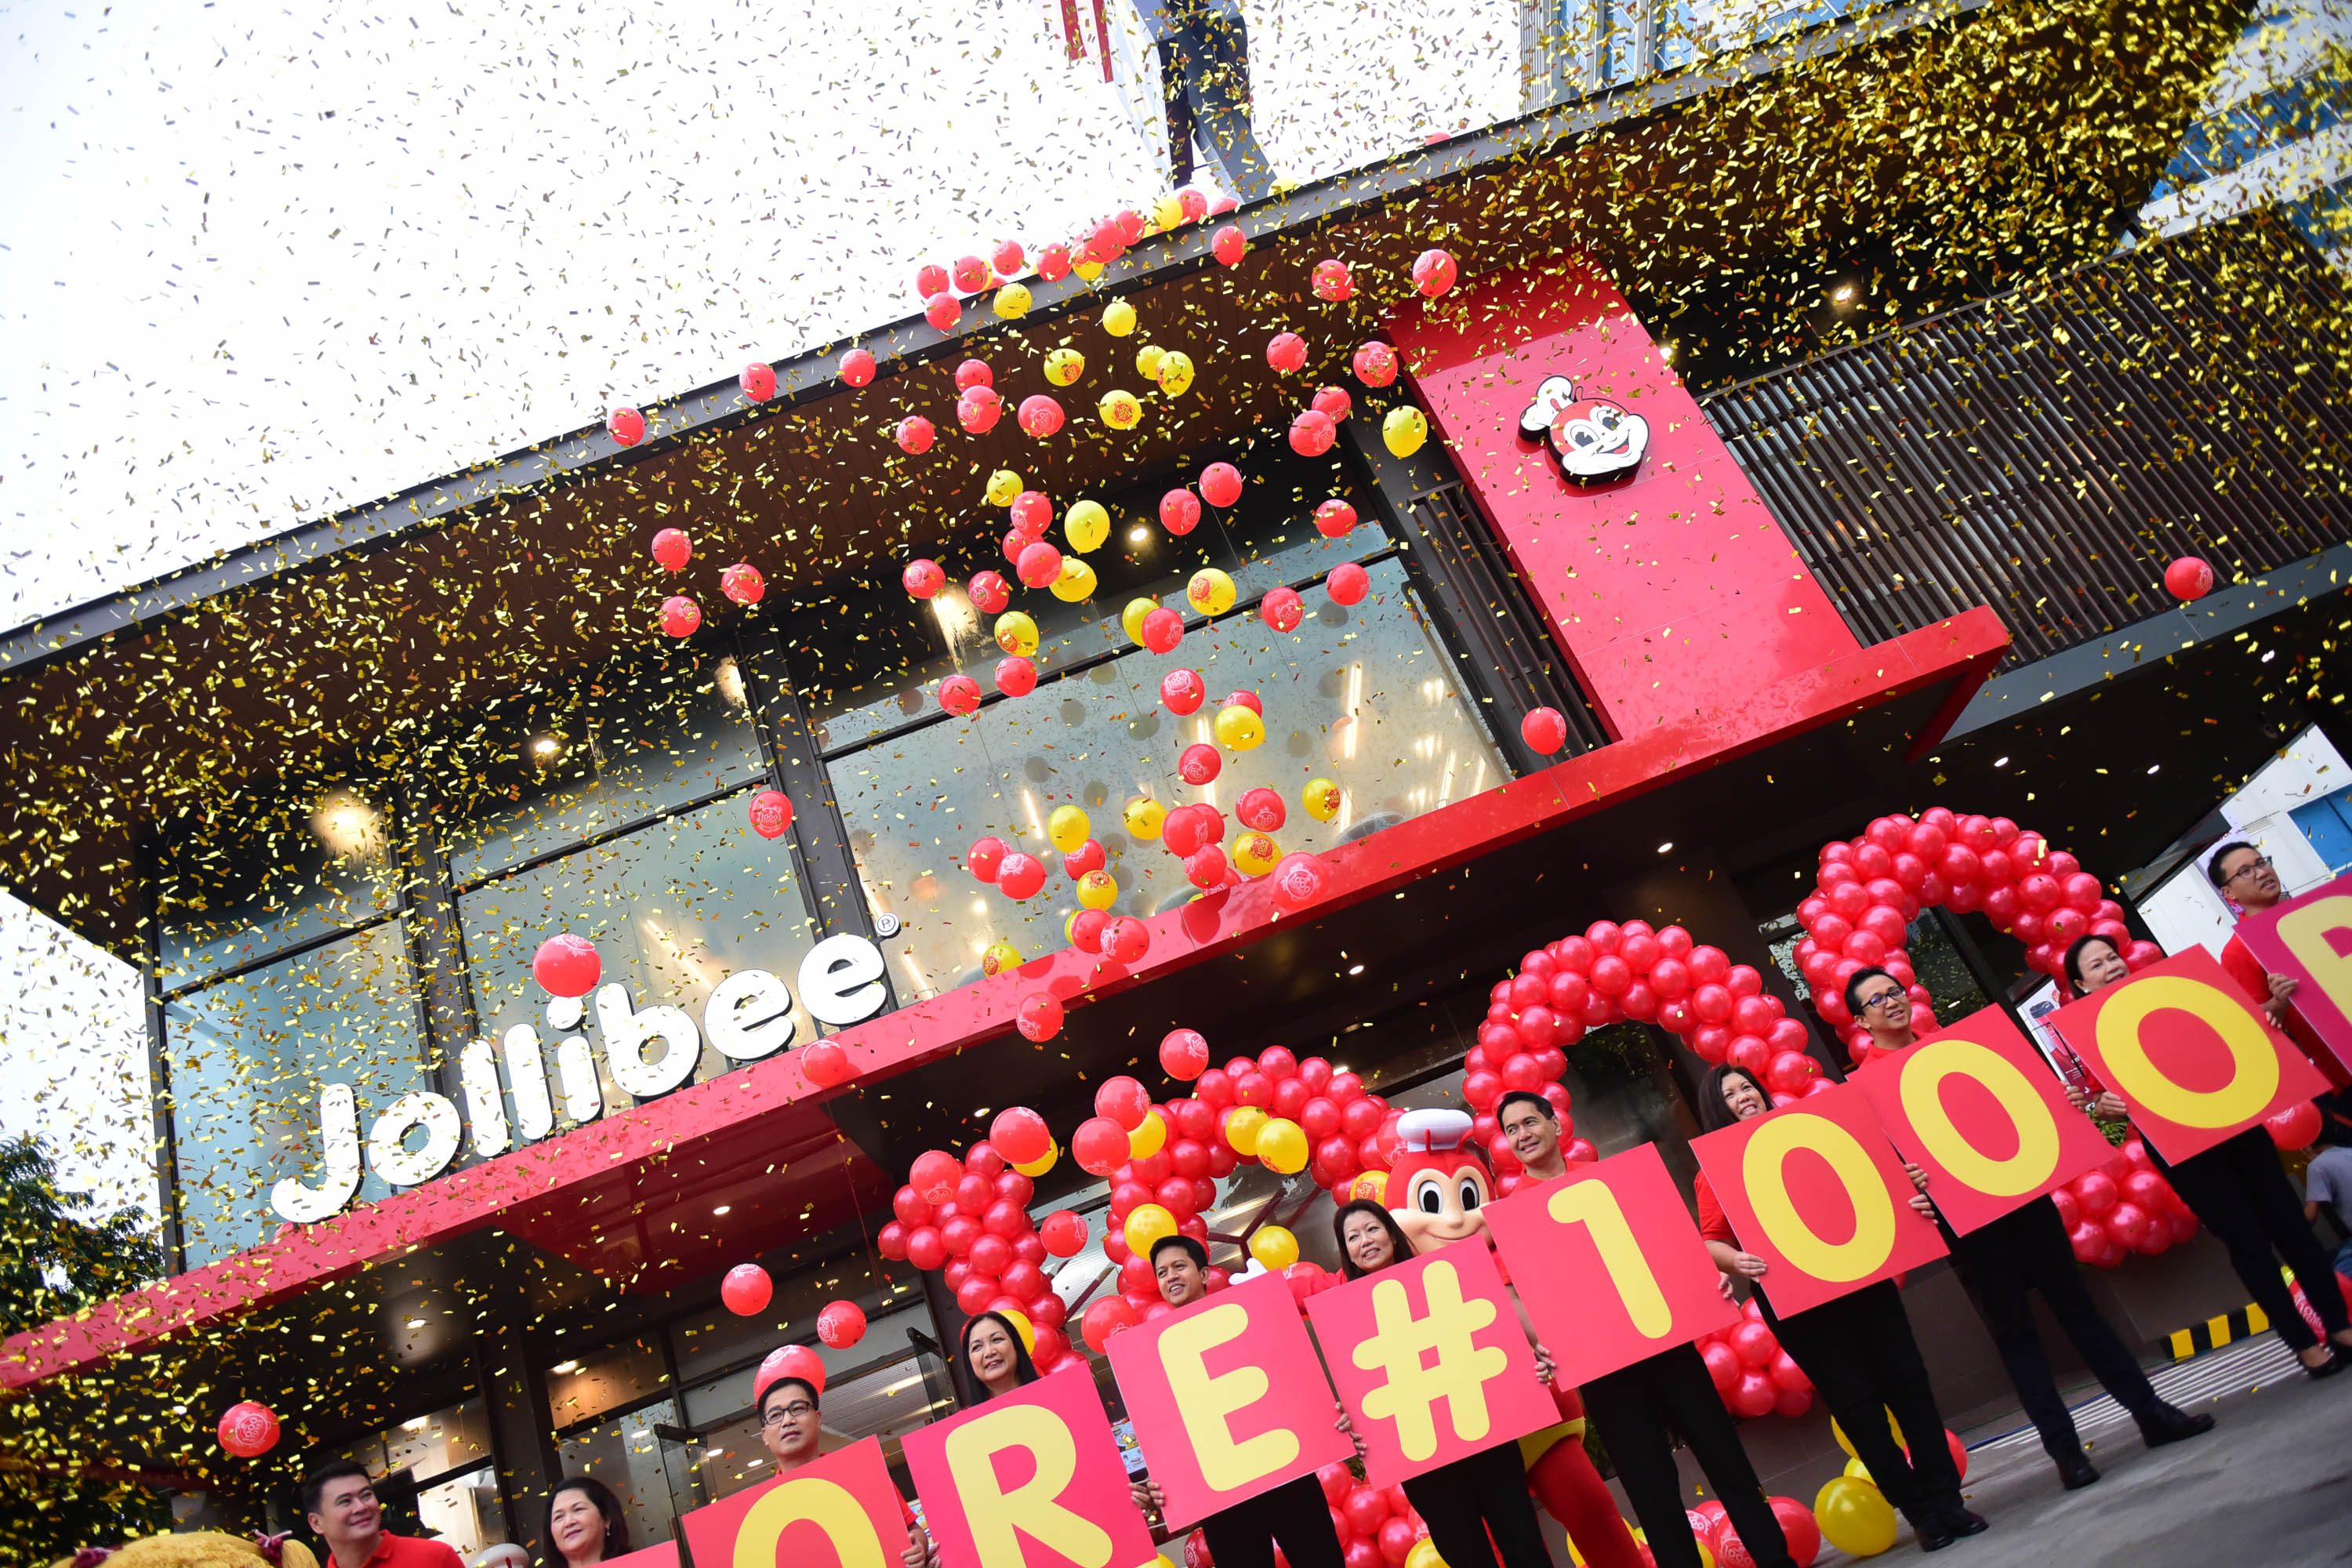 IN PHOTOS: Jollibee opens its 1,000th store